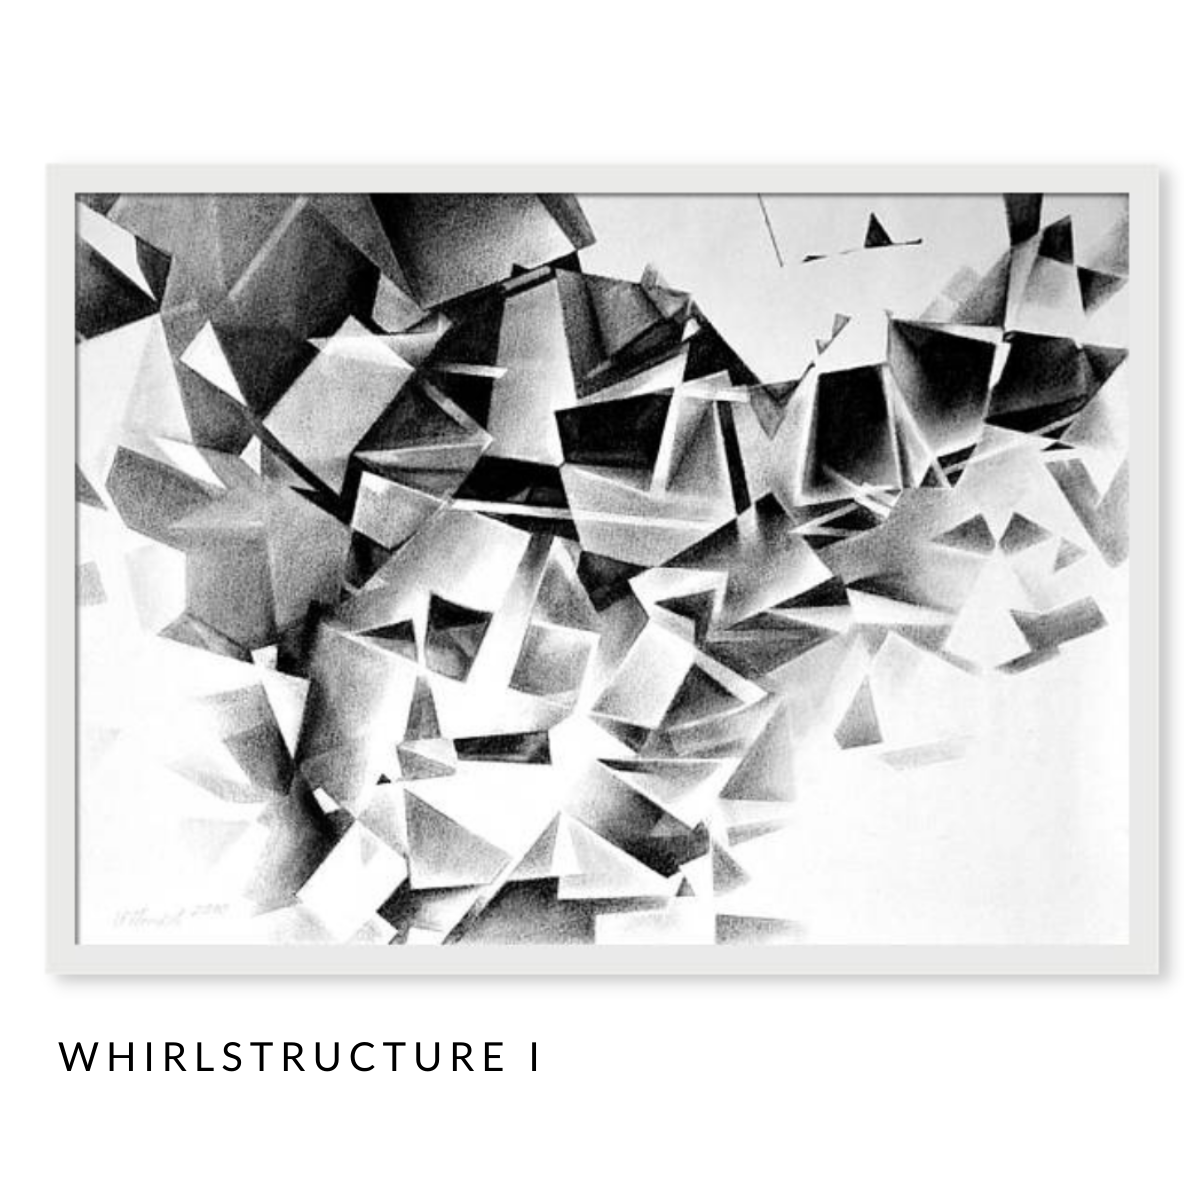 Whirlstructure Art Series - Set of 3 Black and White Pastel Drawings